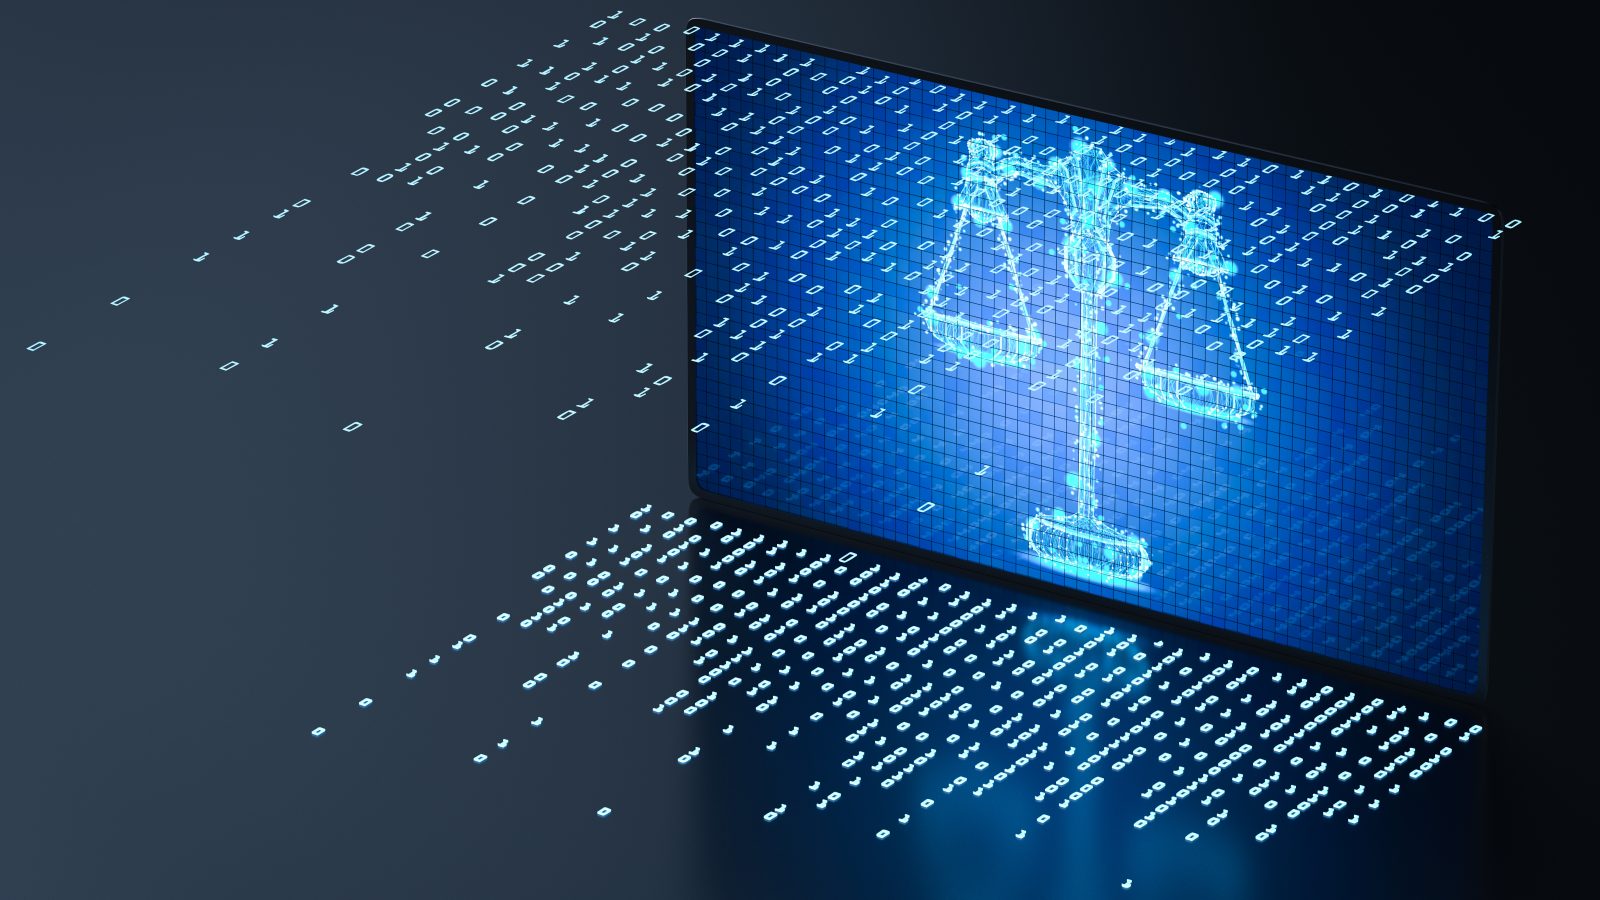 A 3D rendering of a digital screen display with a scale to illustrate a cyber law concept.